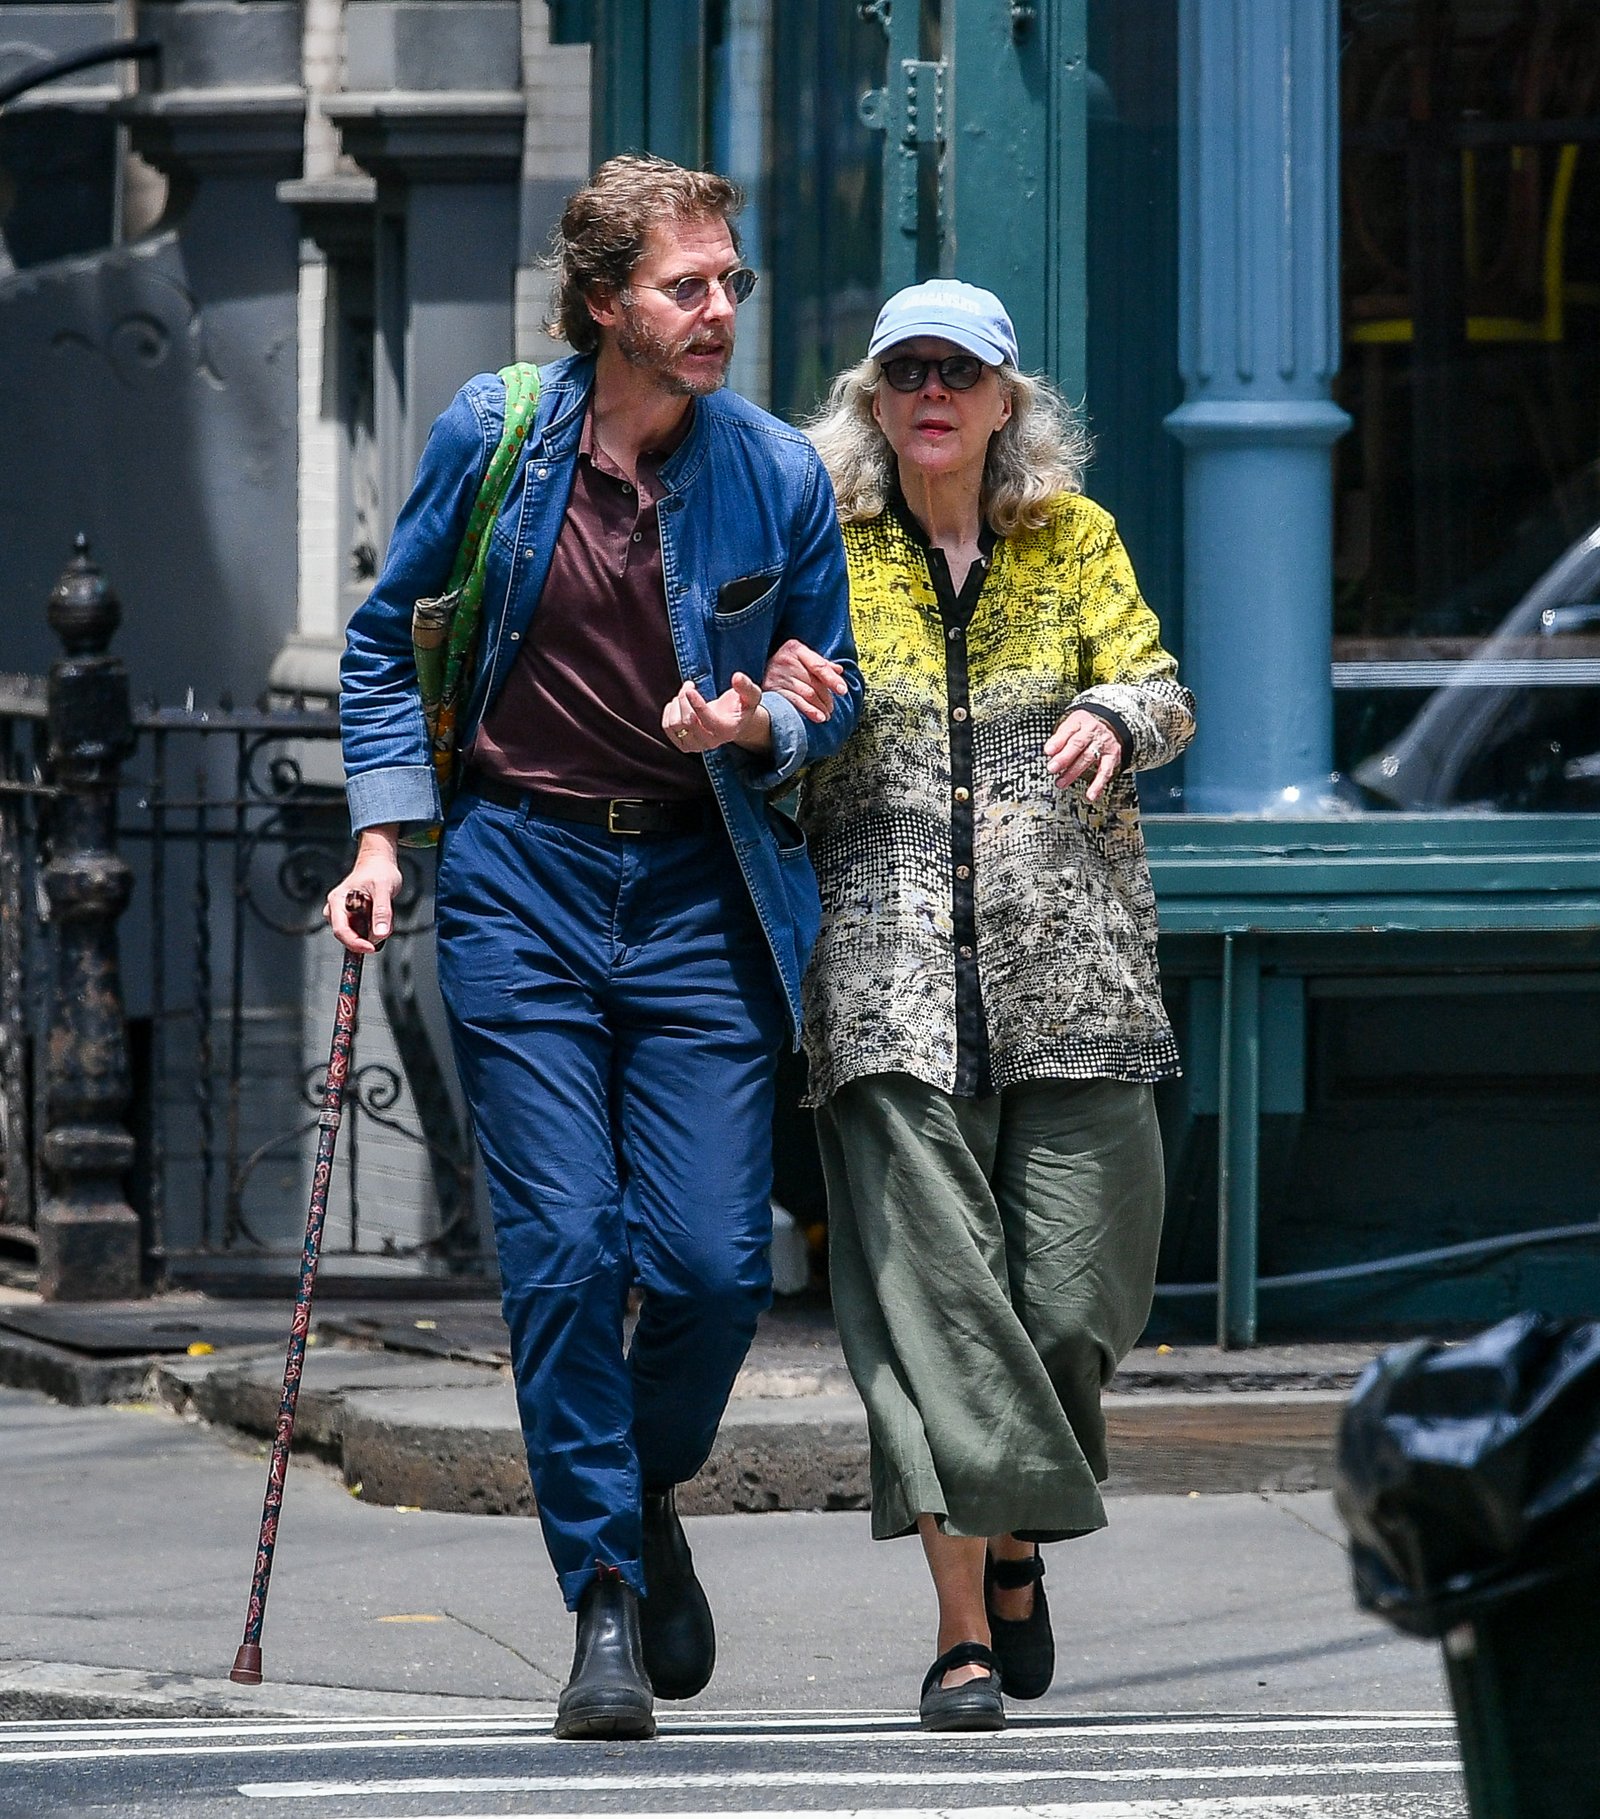 Blythe Danner and her son Jake Paltrow in New York City.